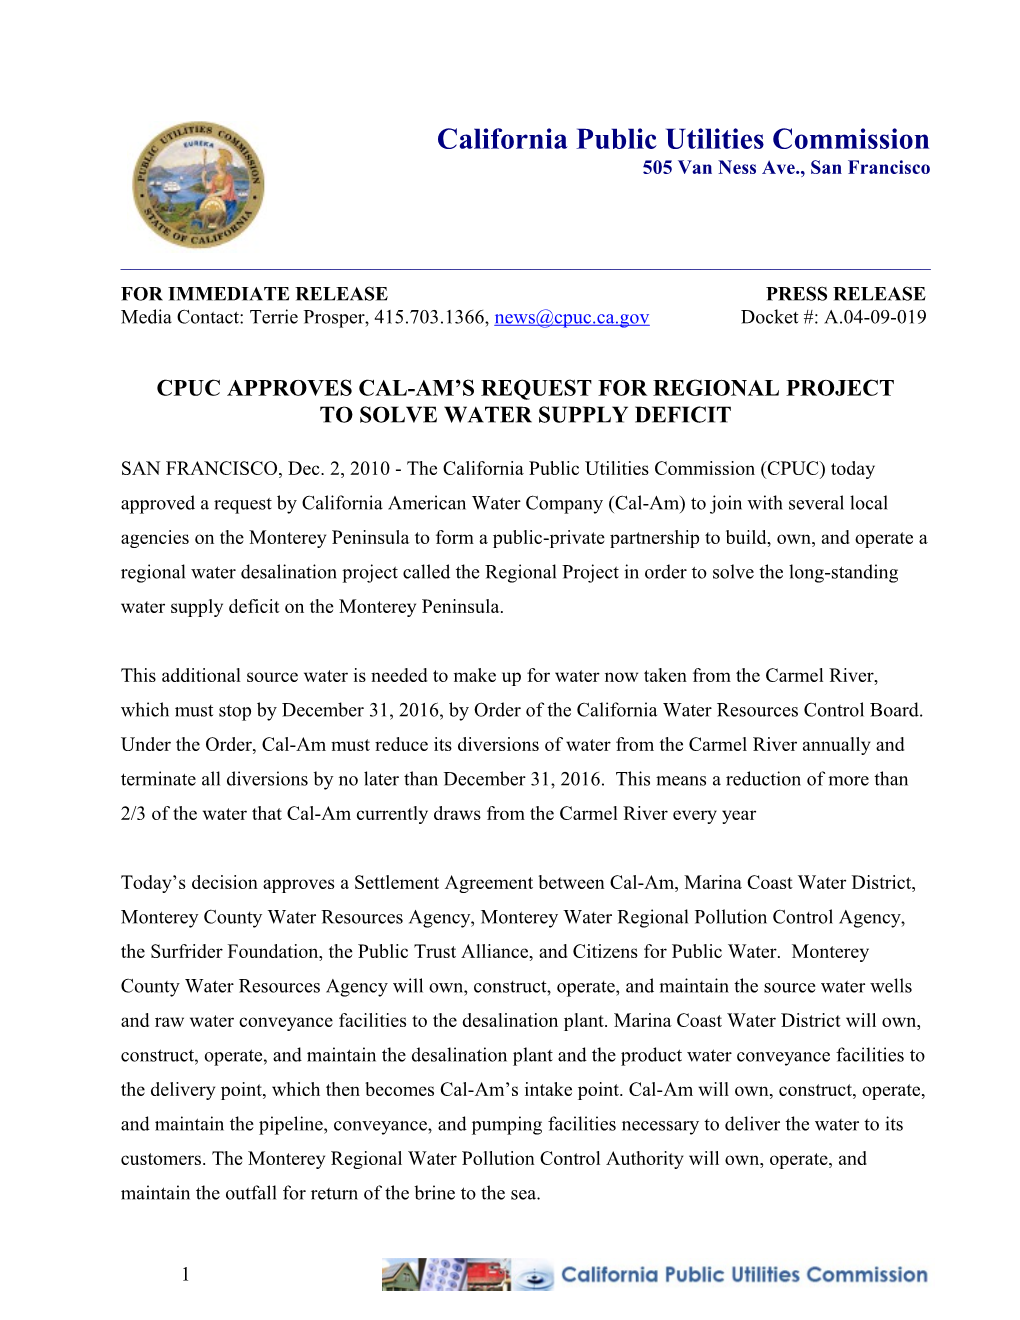 Cpuc Approves Cal-Am S Request for Regional Project to Solve Water Supply Deficit